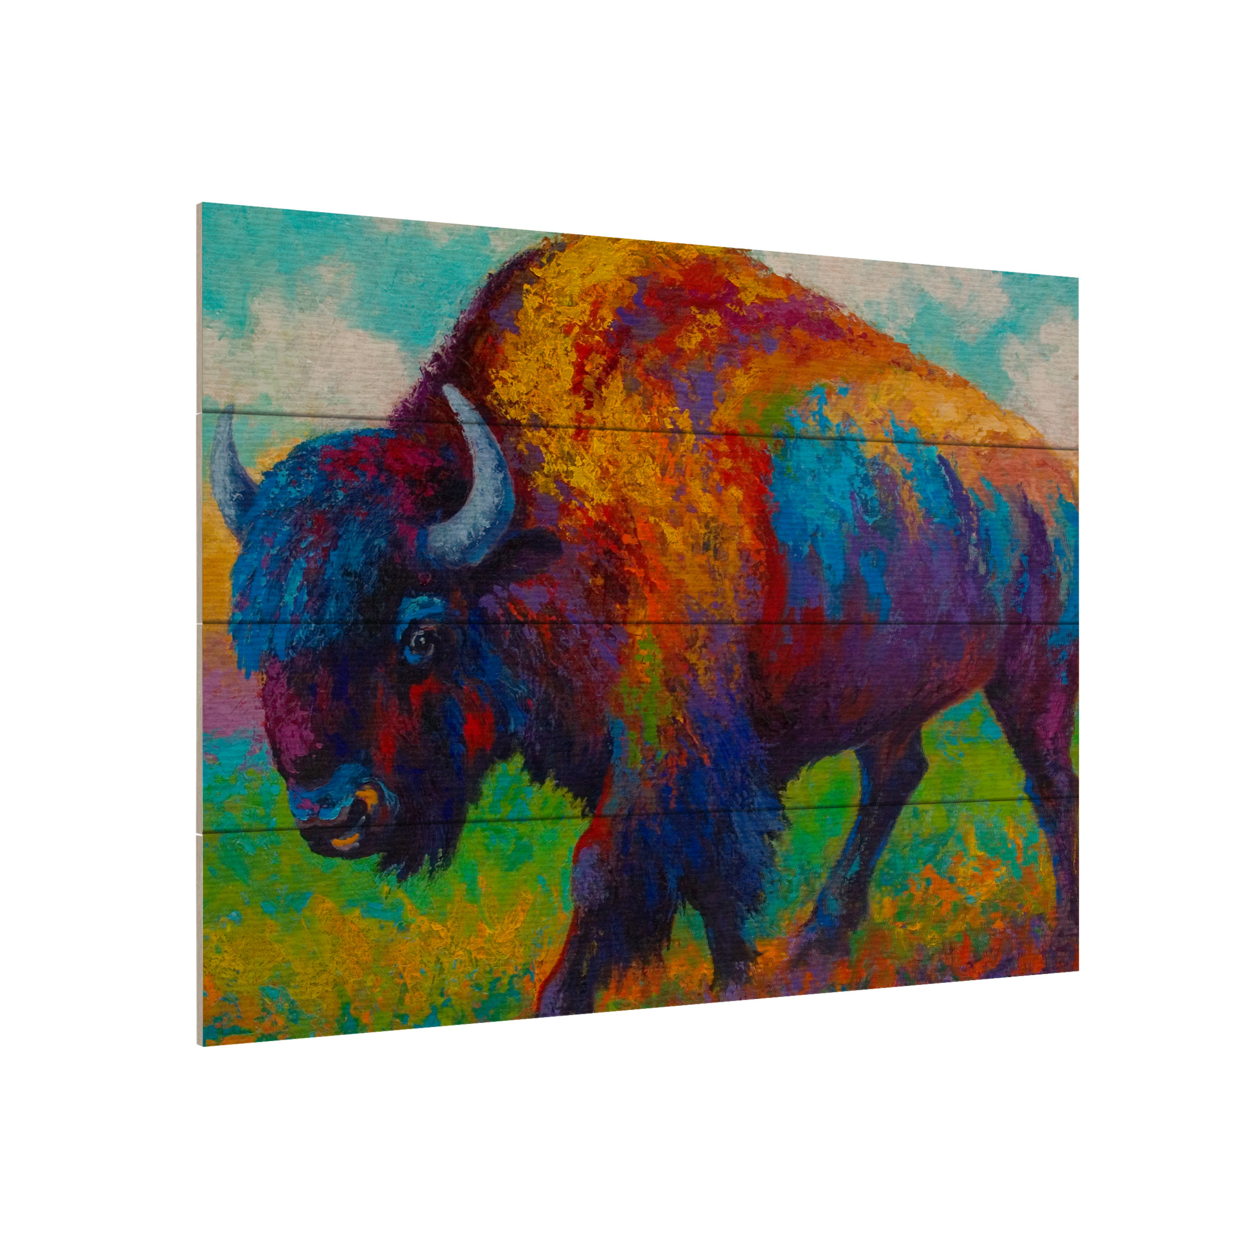 Wall Art 12 X 16 Inches Titled Prairie Muse Ready To Hang Printed On Wooden Planks